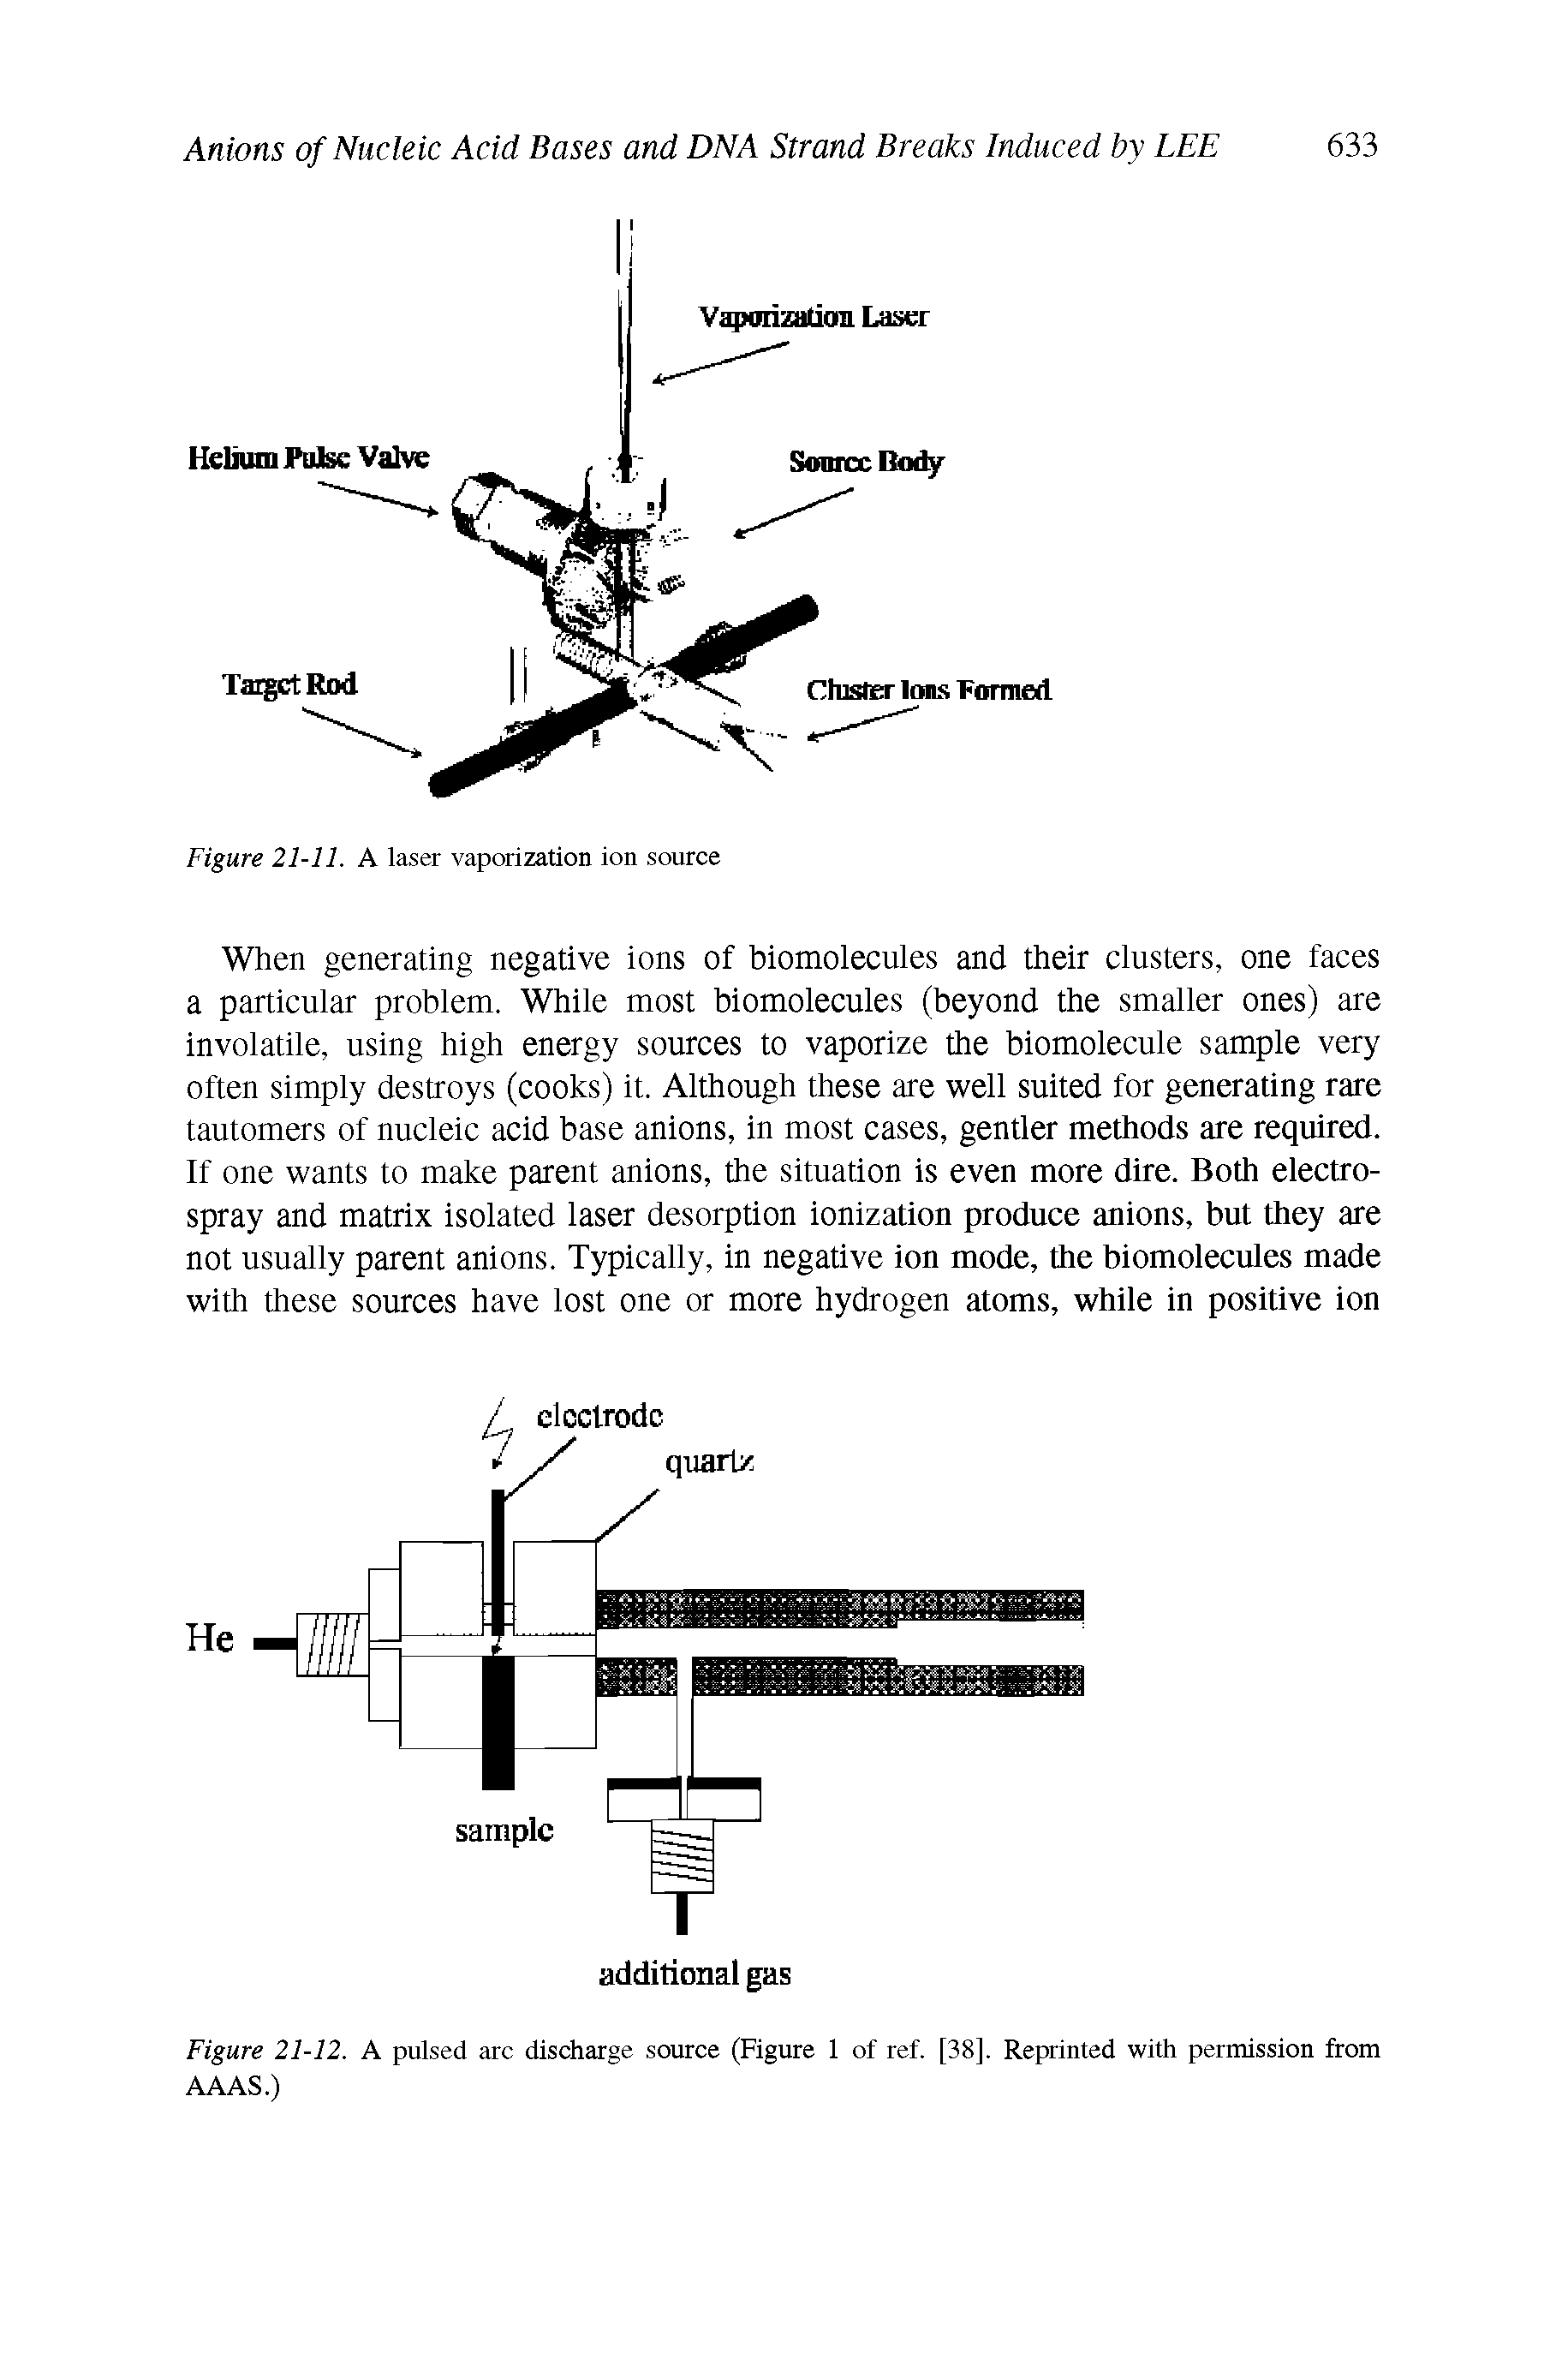 Figure 21-12. A pulsed arc discharge source (Figure 1 of ref. [38], Reprinted with permission from AAAS.)...